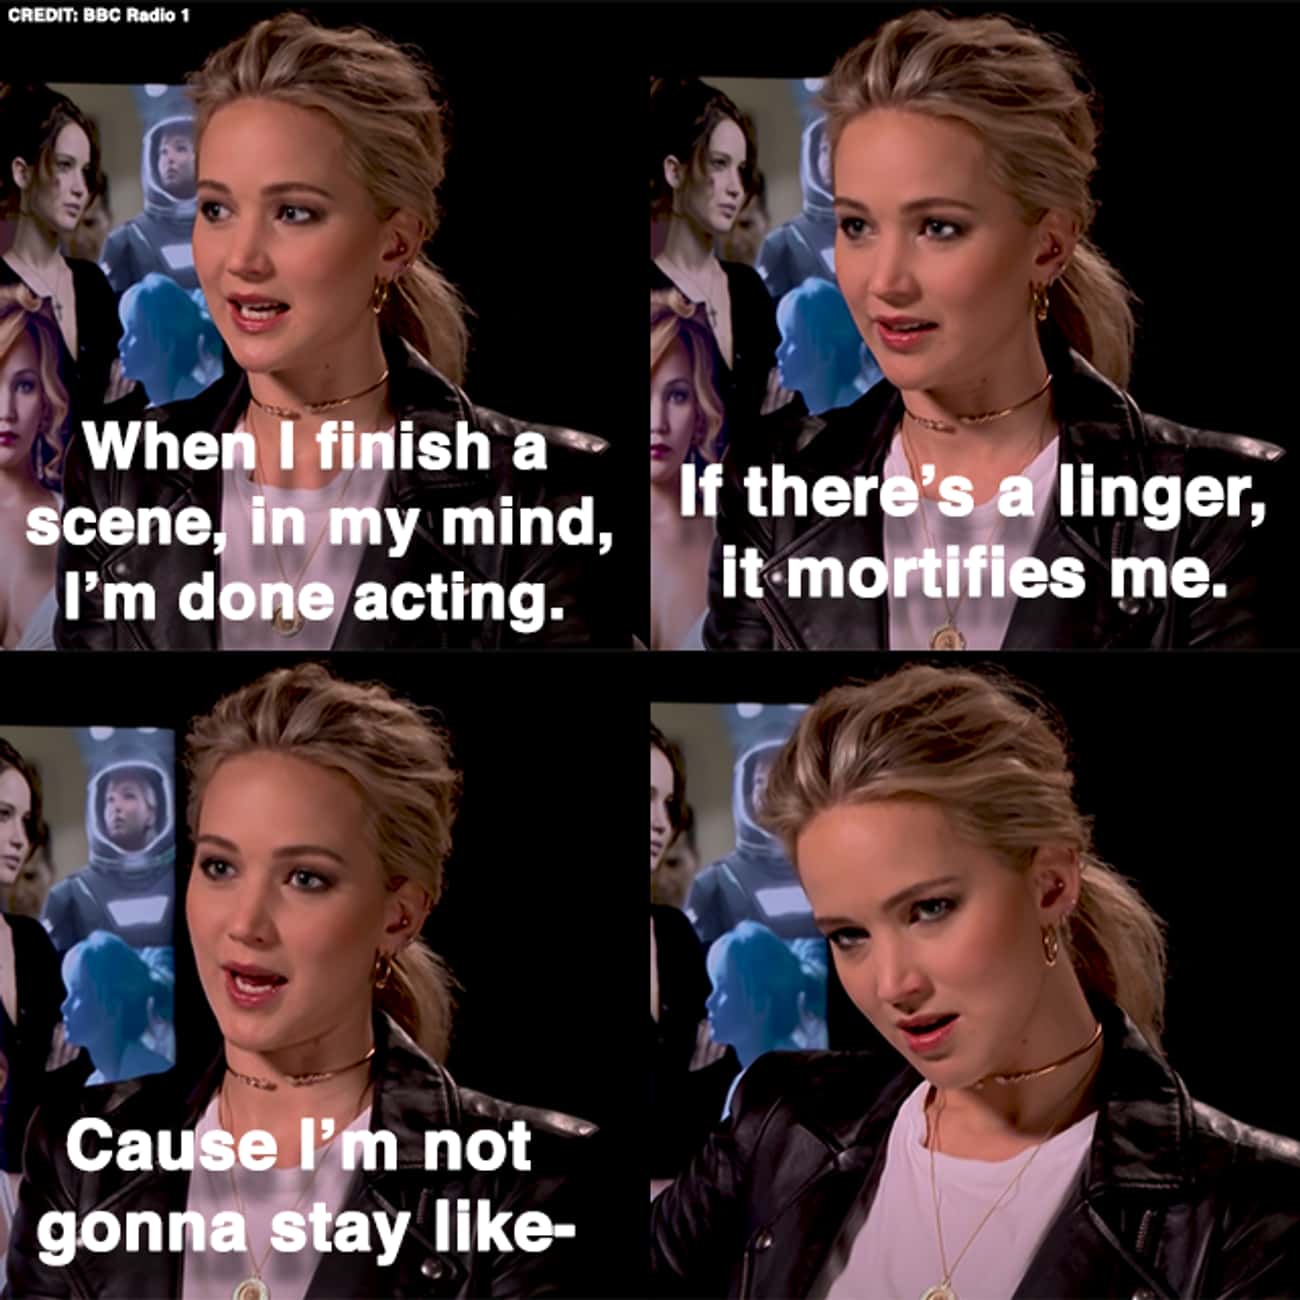 She Discussed How It Feels Ending A Scene